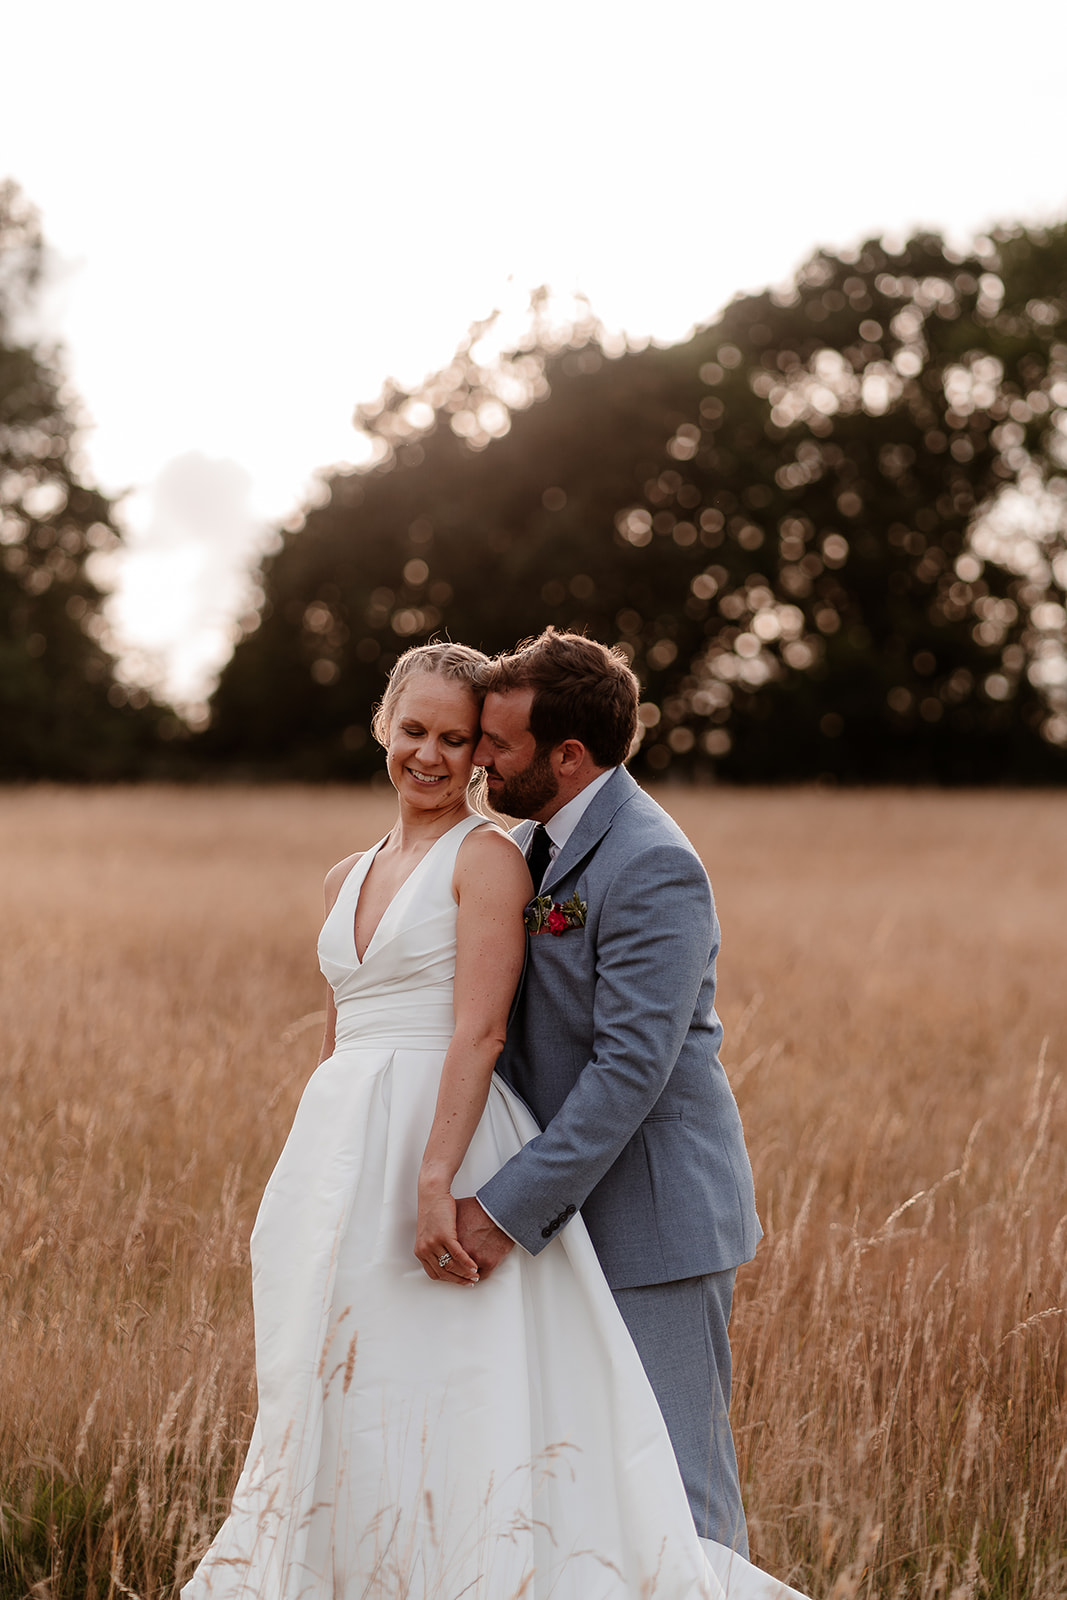 Sunset Wedding Photography: Romantic sunset wedding photography capturing a couple's special moment at Silchester Farm